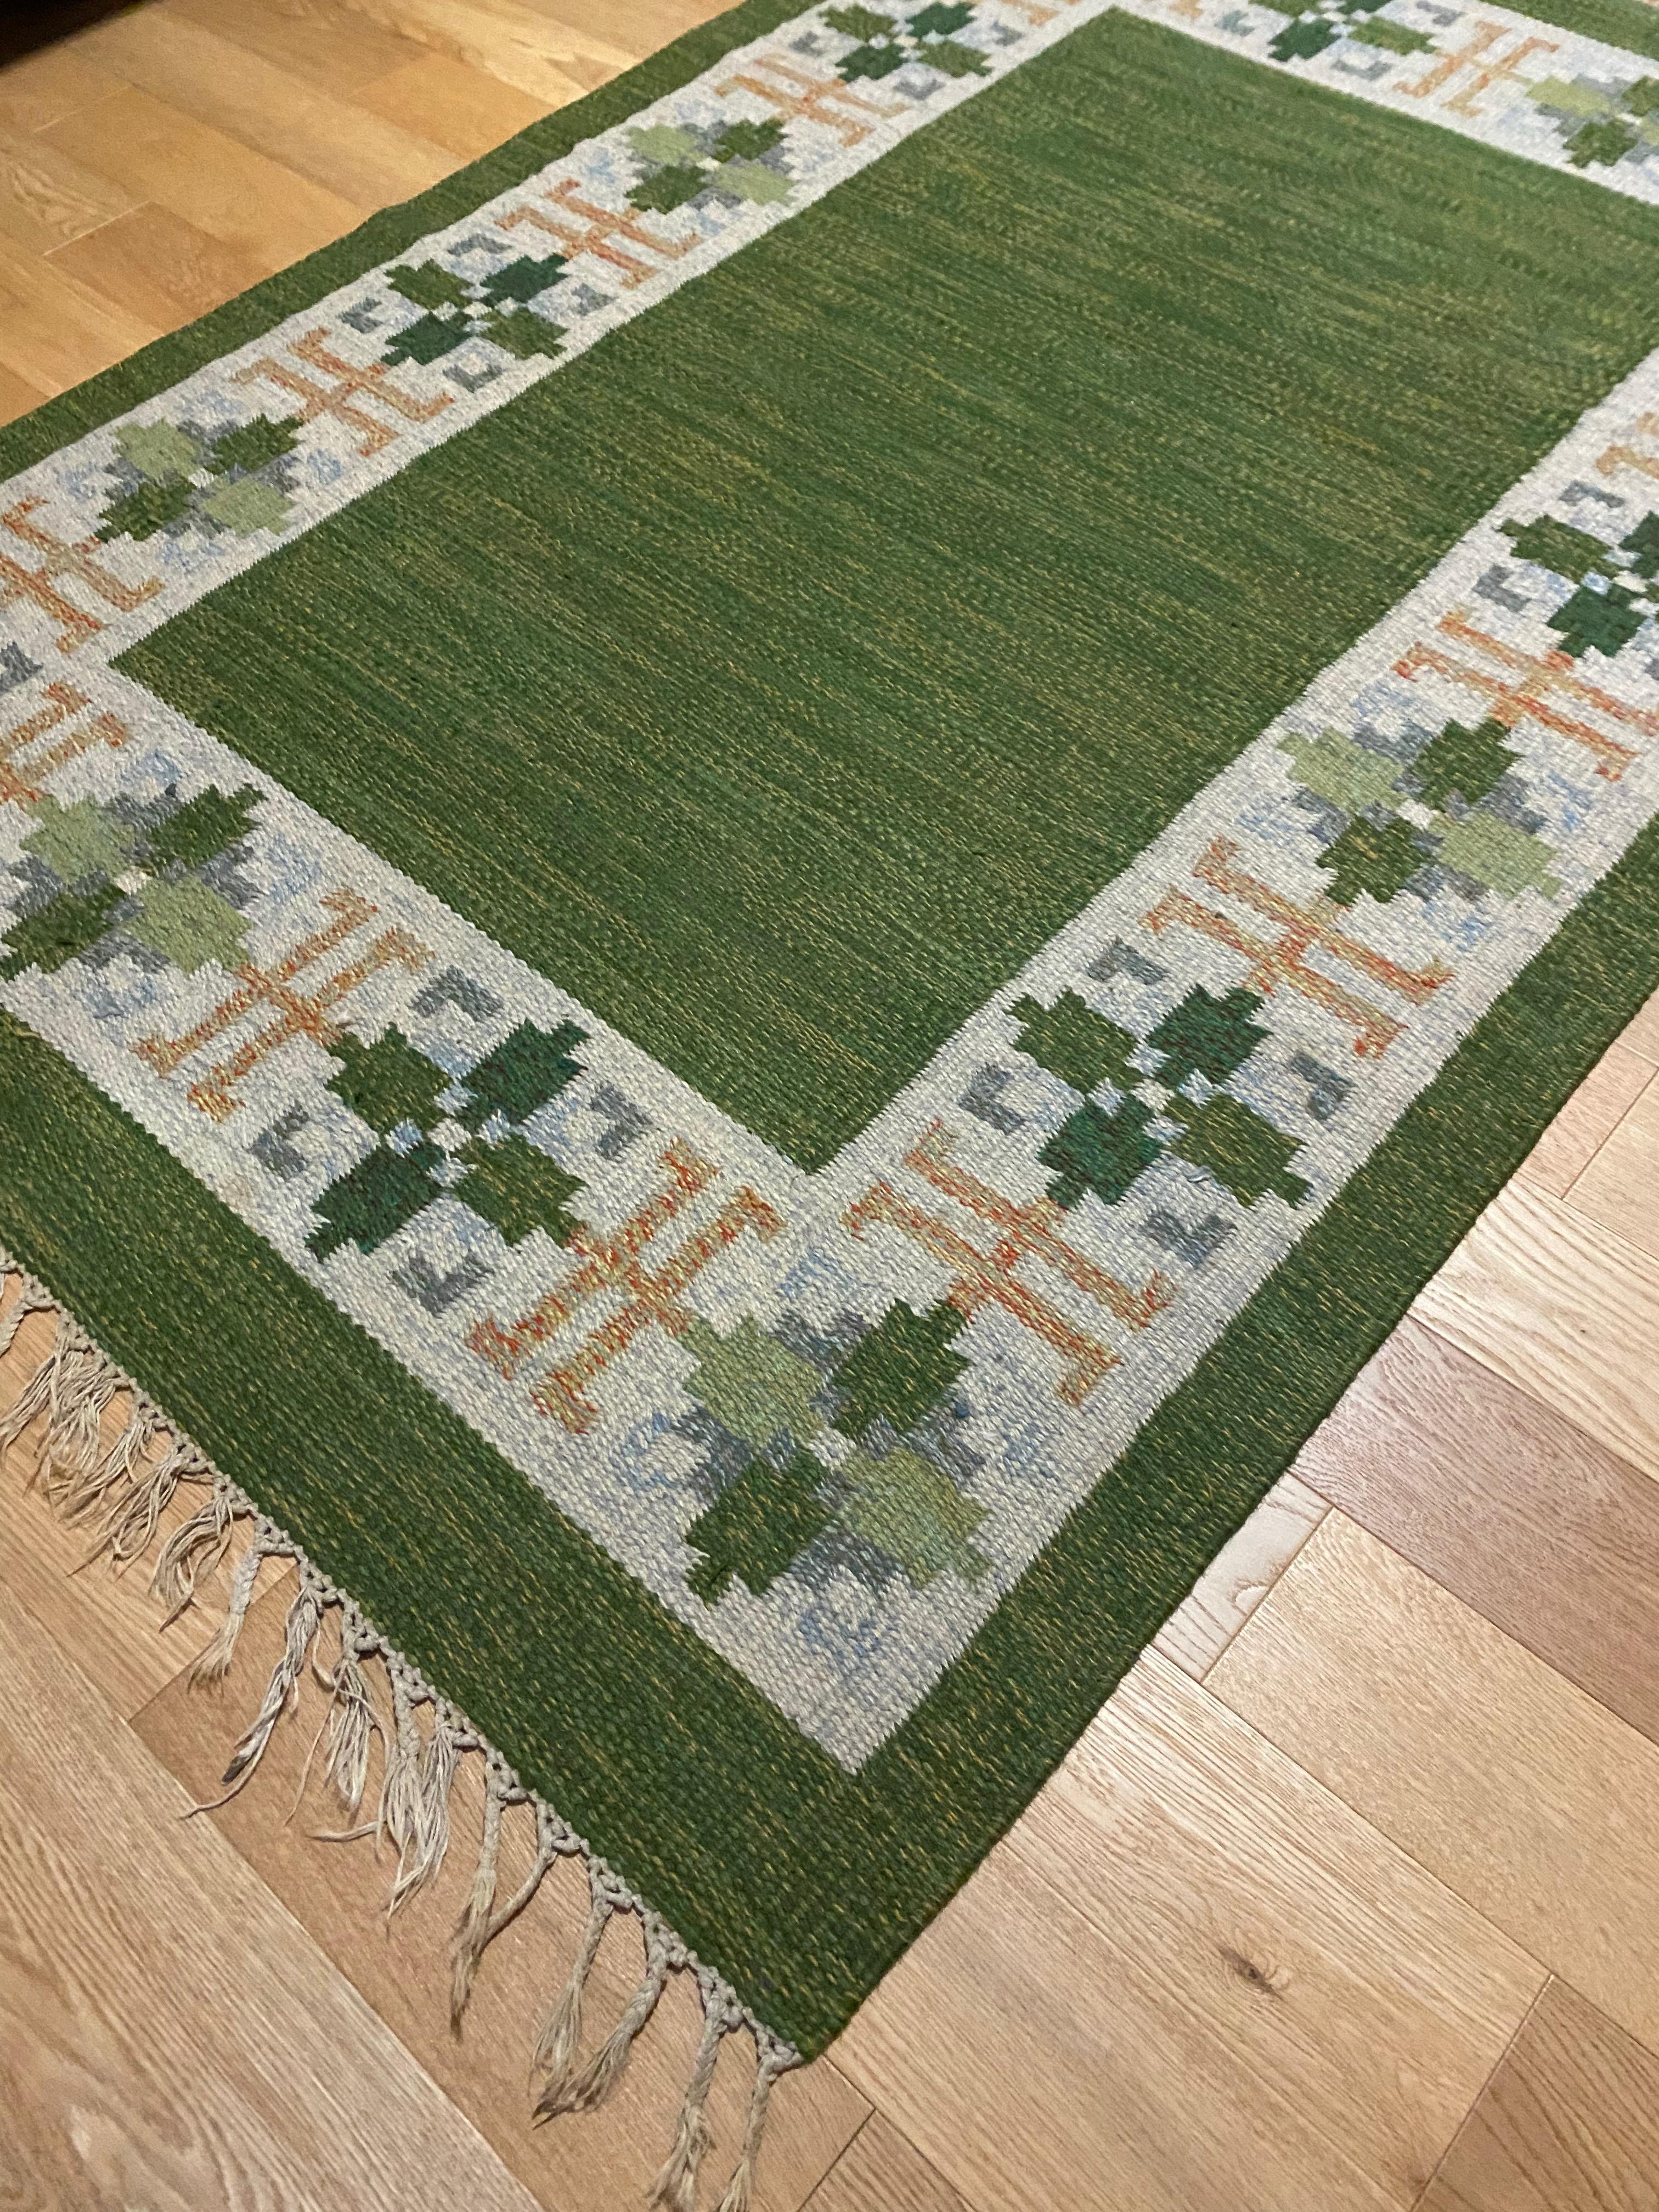 Beautiful Vintage Swedish Green Kilim rug by Fredrik Fiedler. In a good vintage condition with some wear and tear to the fringes and surface (please see photos).

Country: Sweden

Designer: Fredrik Fiedler

Dimensions: L 79.7 in. x W 53.1 in.